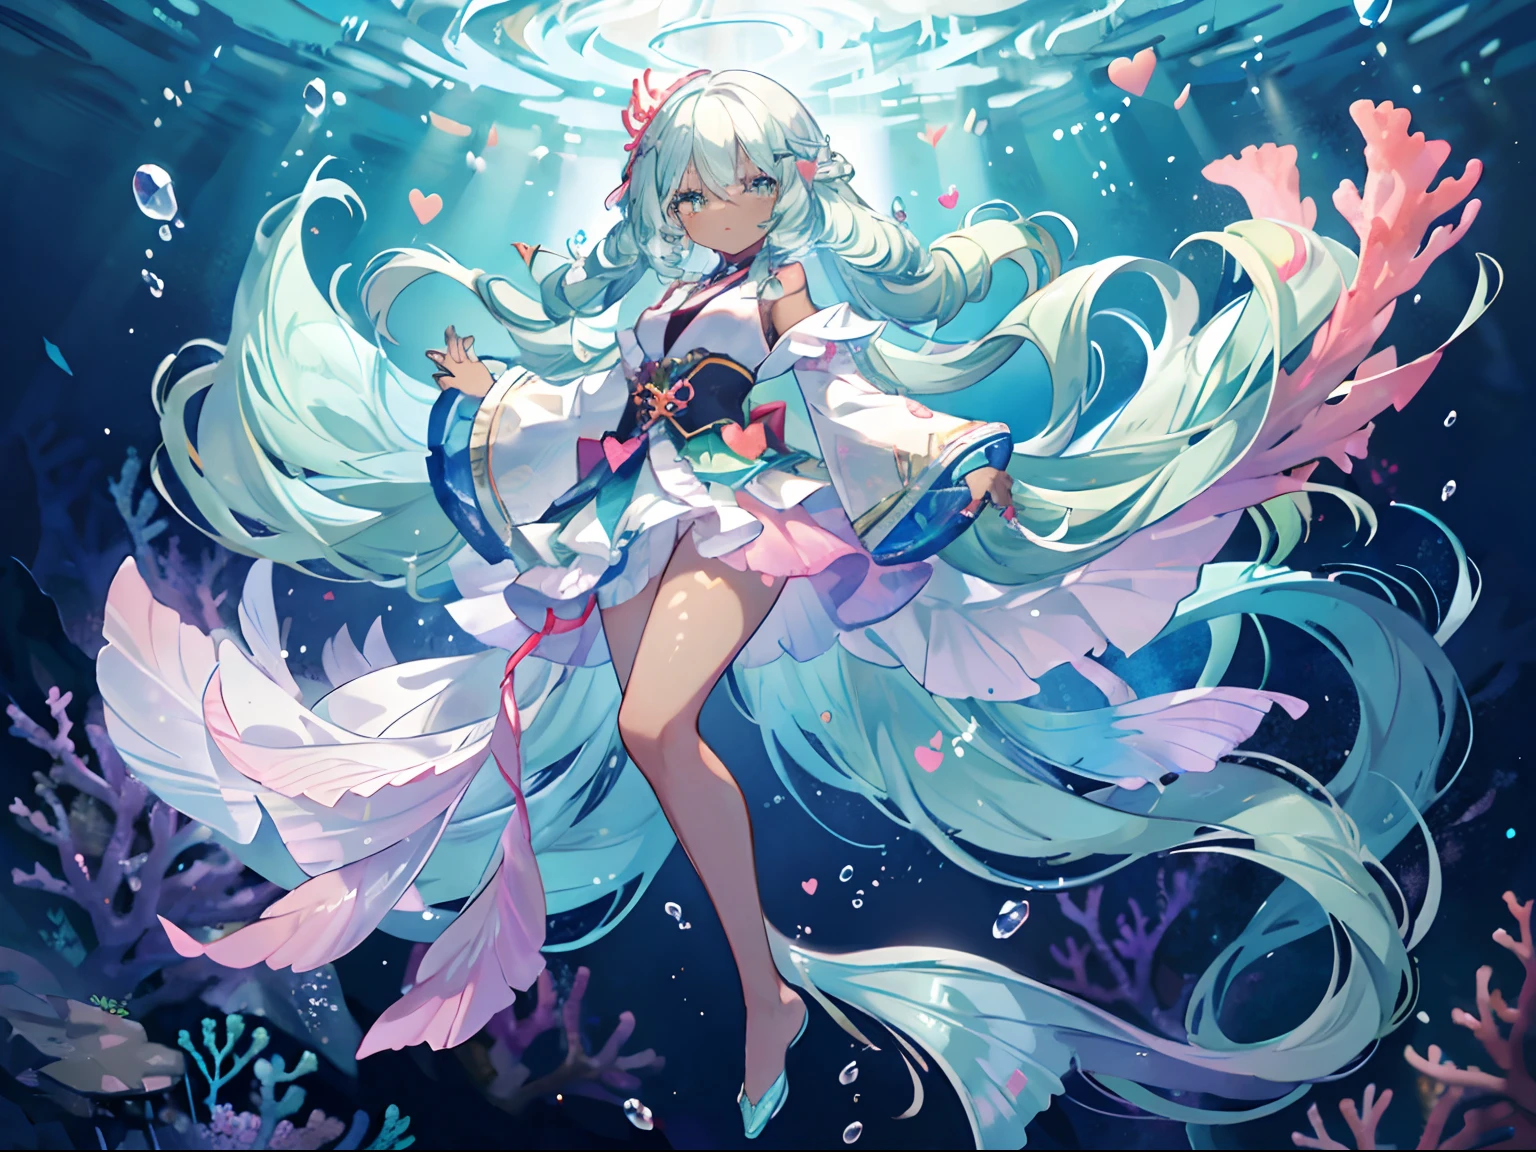 (masterpiece, best quality, sharp focus:1.25), (underwater, submerged:1.3), 1girl, (multicolored hair, gradient hair, two-tone hair, white hair, light green hair, light blue hair:1.3), (light blue-light green sparkling eyes:1.23), (coral-seastar crown:1.2), (slanted eyes, green eyeshadow, long eyelashes, white eyelashes, lips:1.1), (pastel green mermaid scales, mermaid fin:1.2), (((posing for viewer, full body shot))), (scenery, pastel coral, coral reefs, bubbles, seaweed, fish, glitter, hearts:1.2) add_detail:0.5, add_detail:1, add_detail:1, add_detail:0, add_detail:2, InkAnime, RETRO ART STYLE, NEON_POP ART STYLE, ART STYLE, kahuka1, COLORFULMIX, MULTICOLORED HAIR, WAVY HAIR, (Korean webtoon girl, big eyes, ombre lipstick, cute face, oval face), mksks, ((Kawaii, cute, pretty, anime, pastel)), kawaiitech, pastel colors, kawaii, cute colors, best quality, symbol-shaped pupils, long hair, fluffy bangs, unique hair style, hair clips, long hair tie, ((masterpiece)), feminine, hair, dark-skinned, black girl, person of color, bright eyes, cute expression, anime, golden ratio, intricate detail, 8k post production, high resolution, sharp focus, intricate detail, highly detailed, anime, black girl, dark skin color, dark skin, brown skin, close up, detailed face